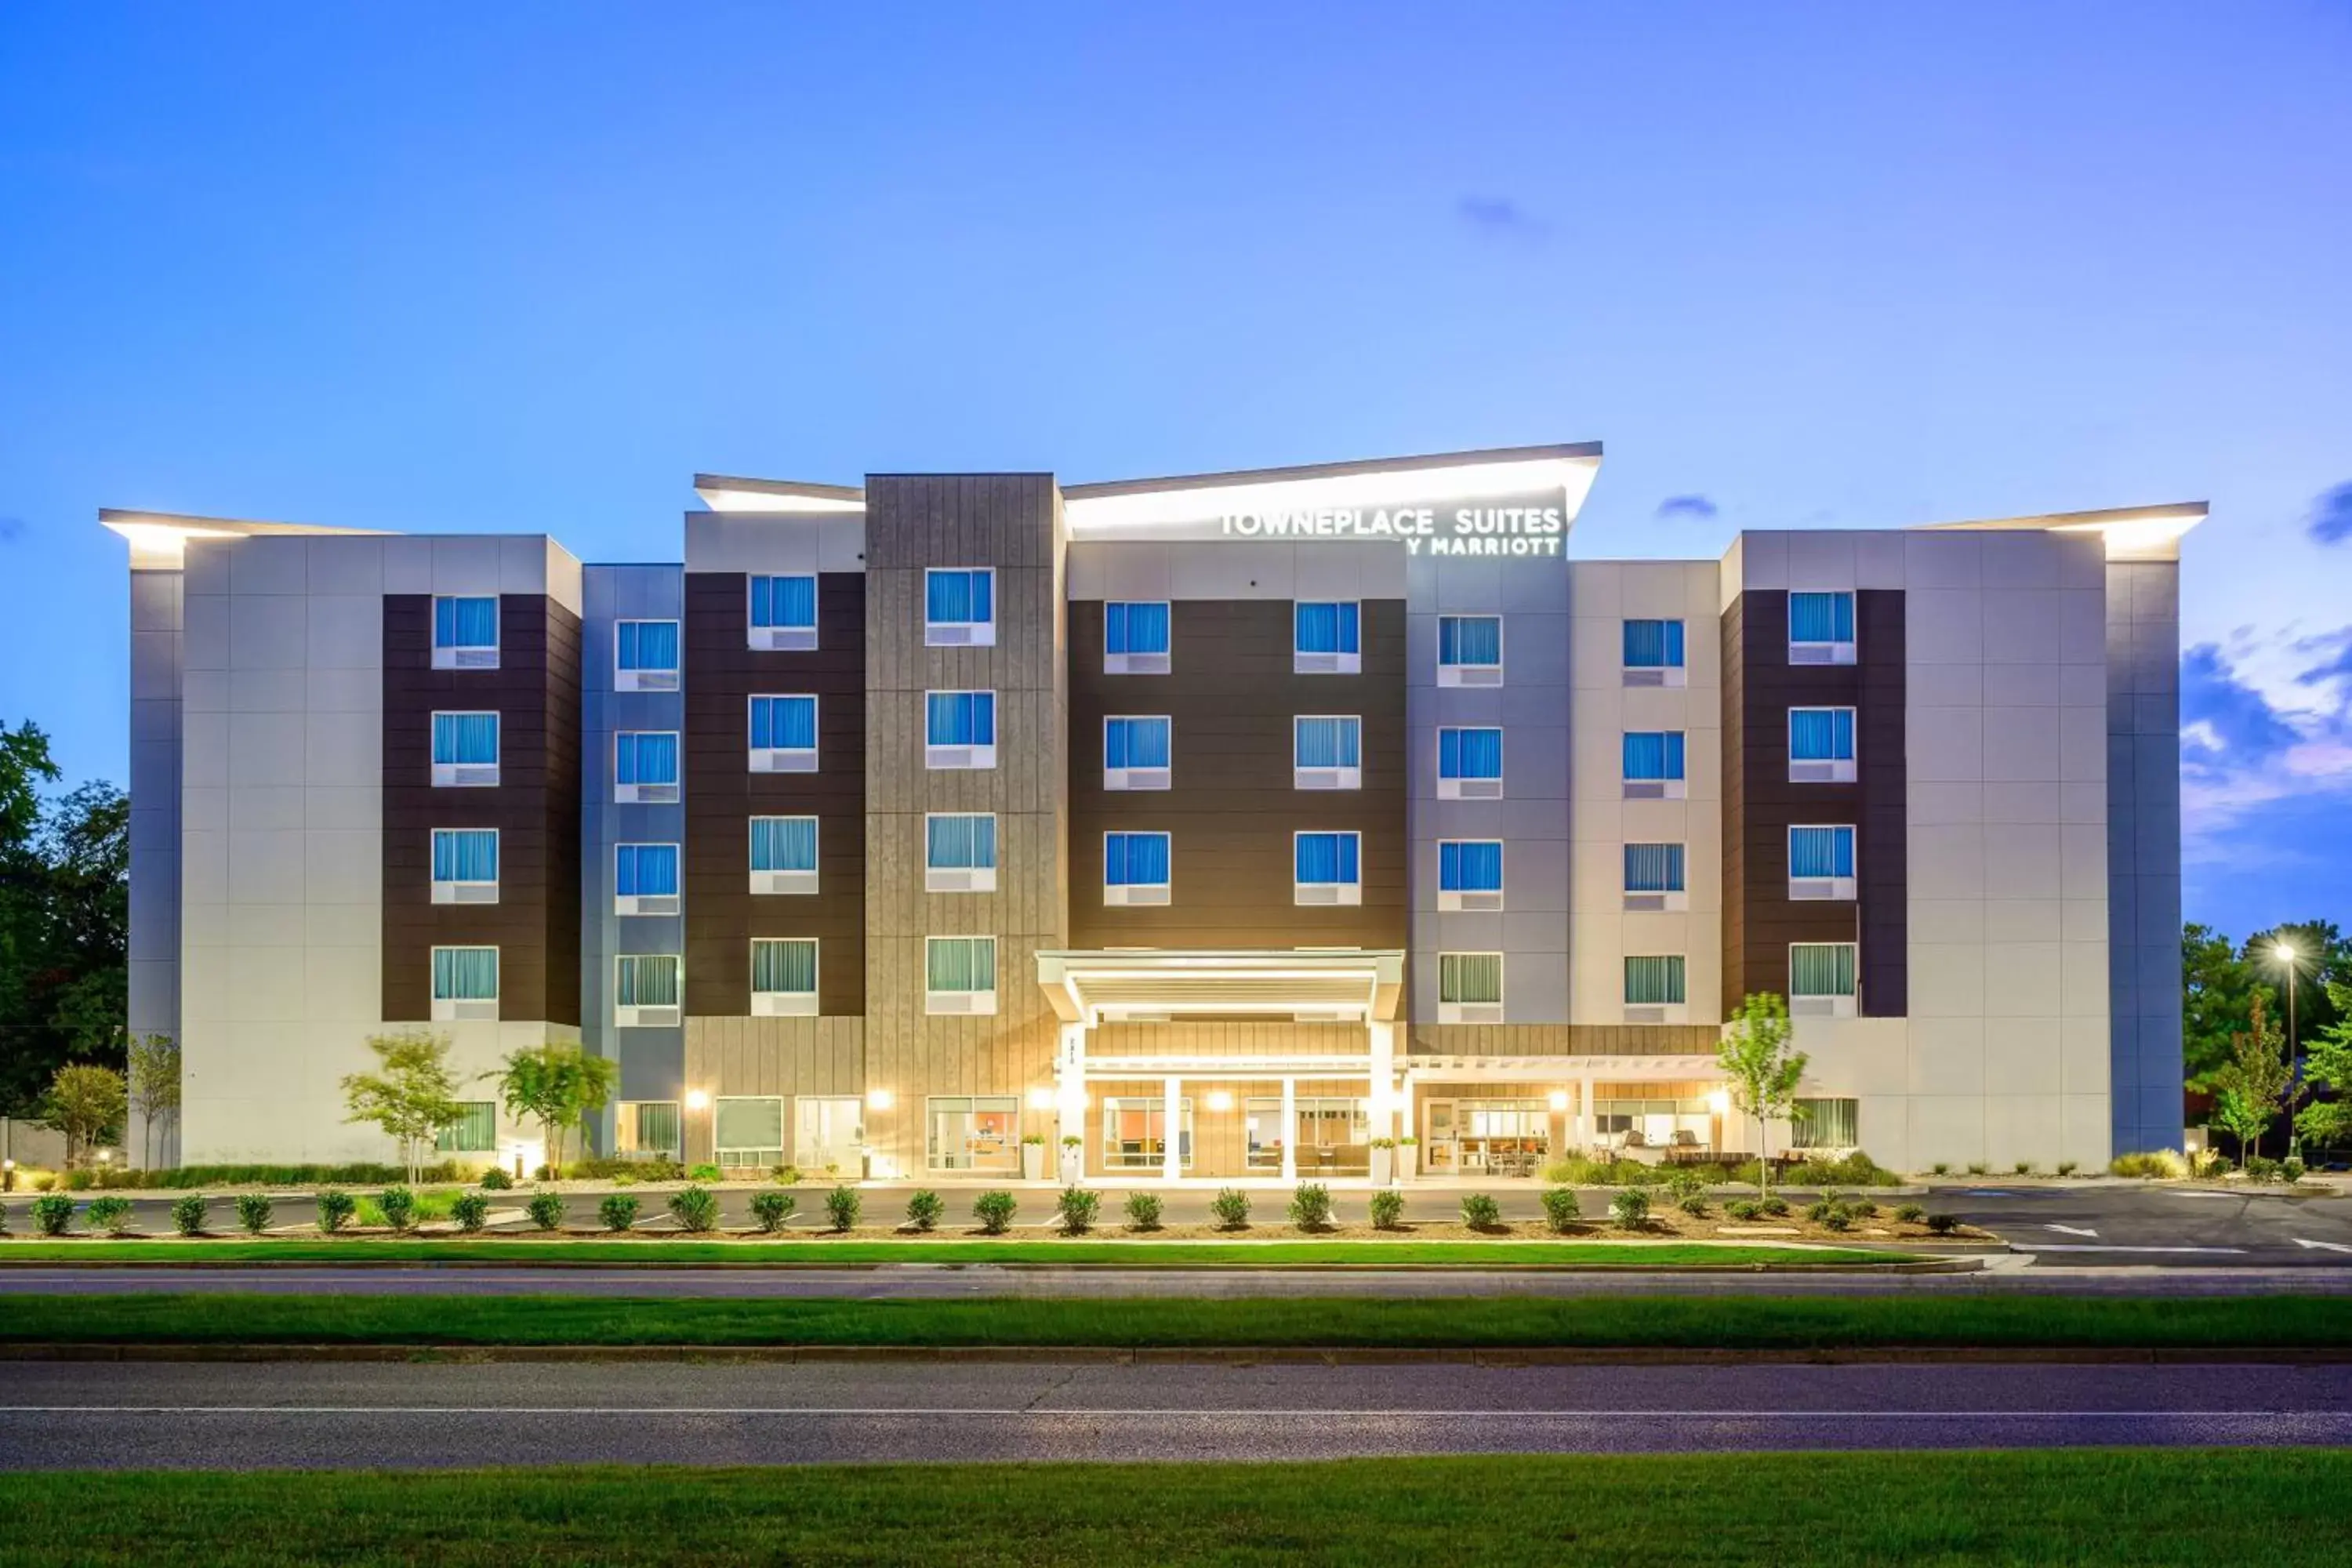 Property Building in TownePlace Suites by Marriott Tuscaloosa